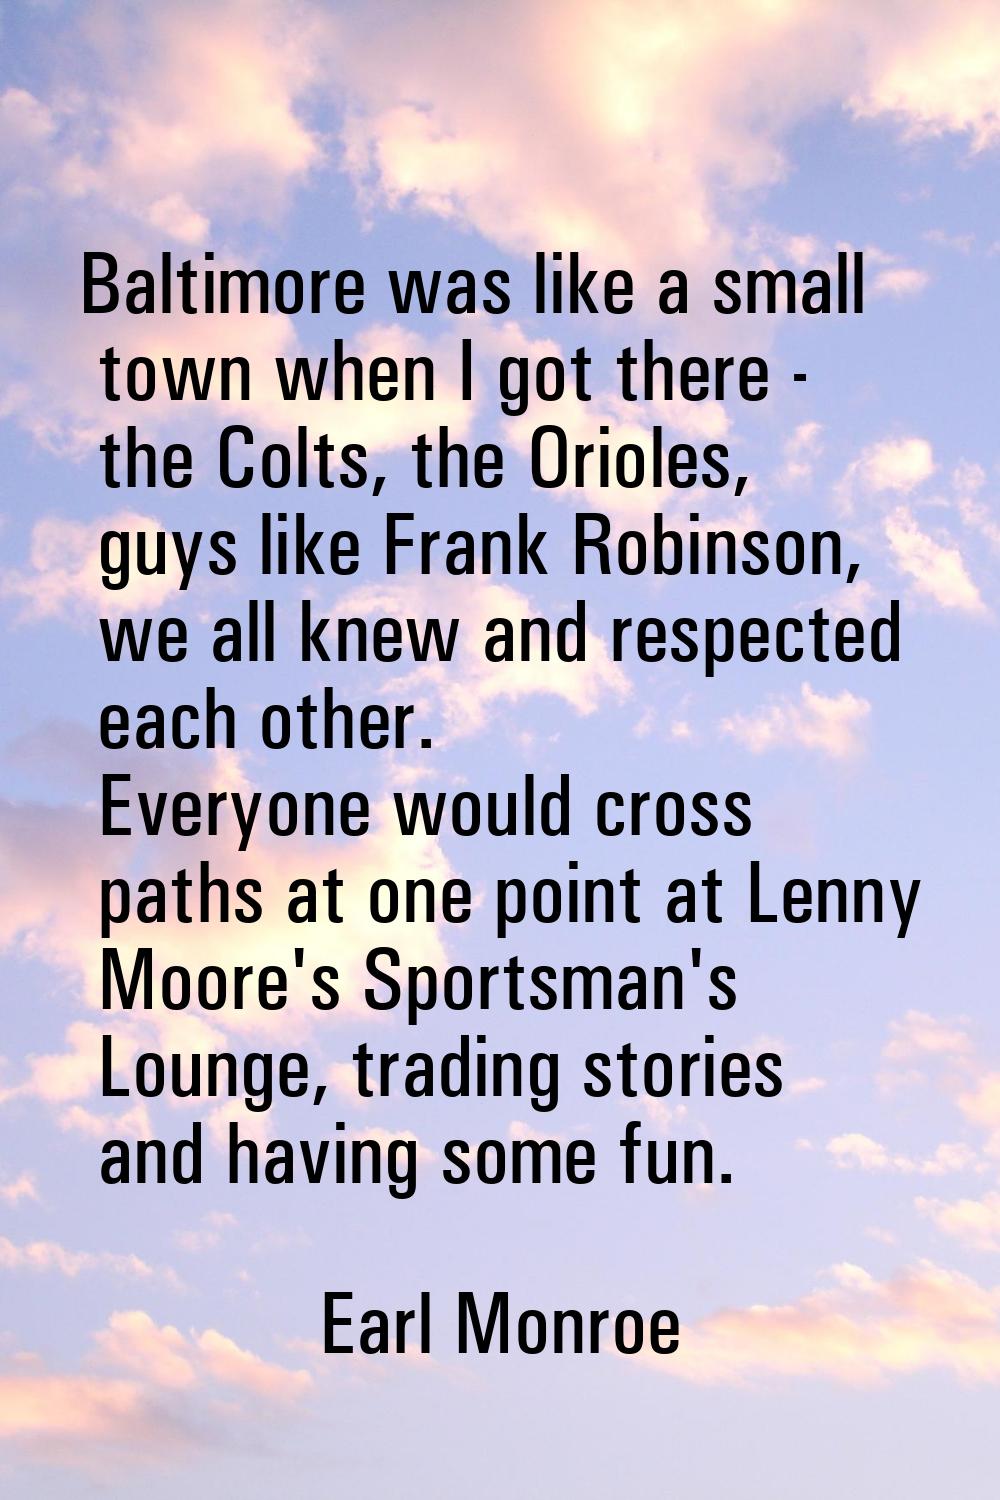 Baltimore was like a small town when I got there - the Colts, the Orioles, guys like Frank Robinson